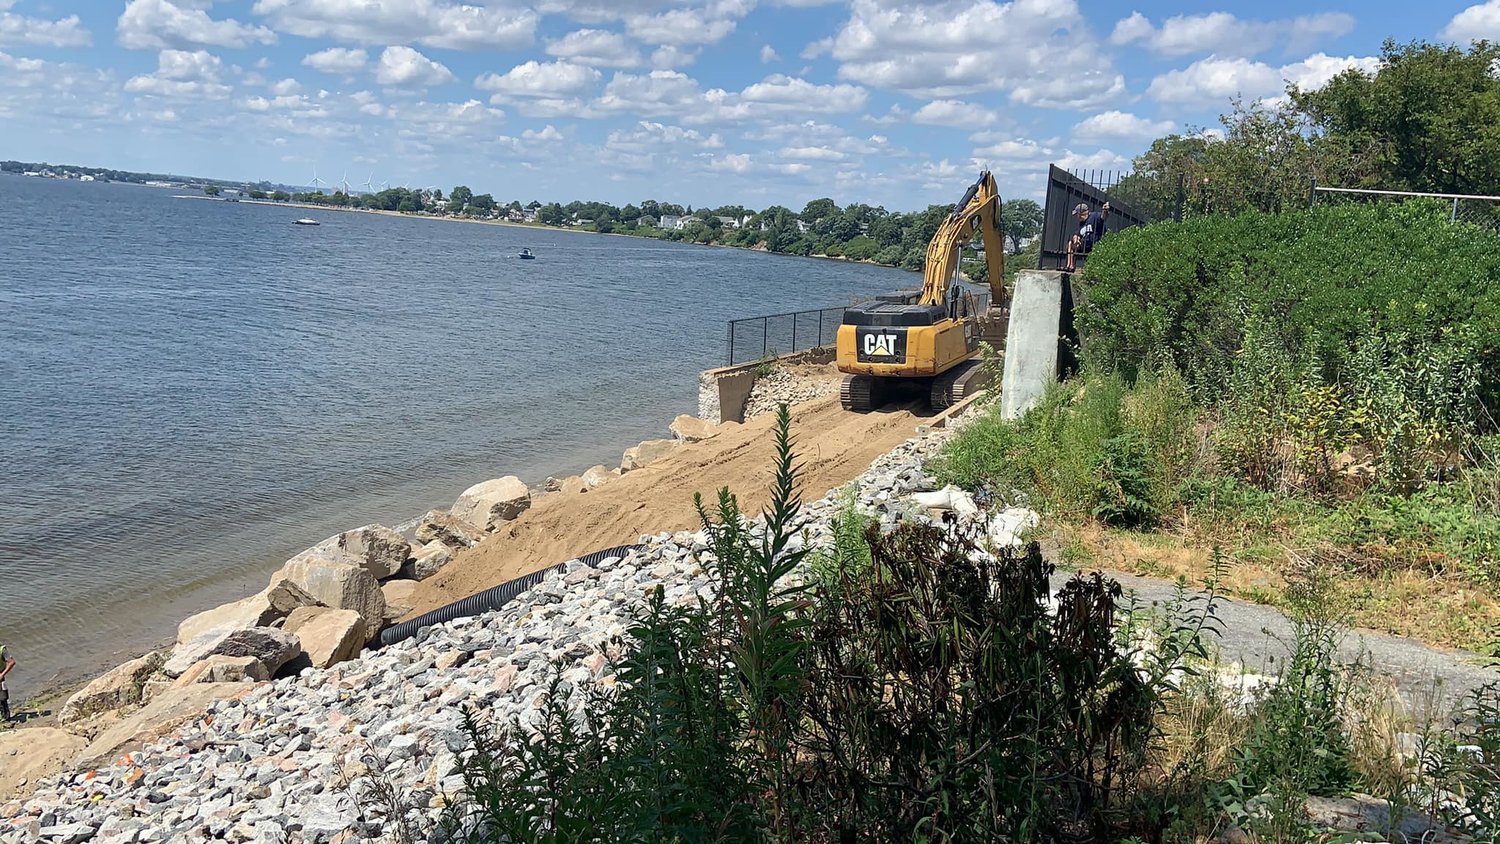 Along with the Carousel restoration, the nearby Crescent Park seawall is being repaired.